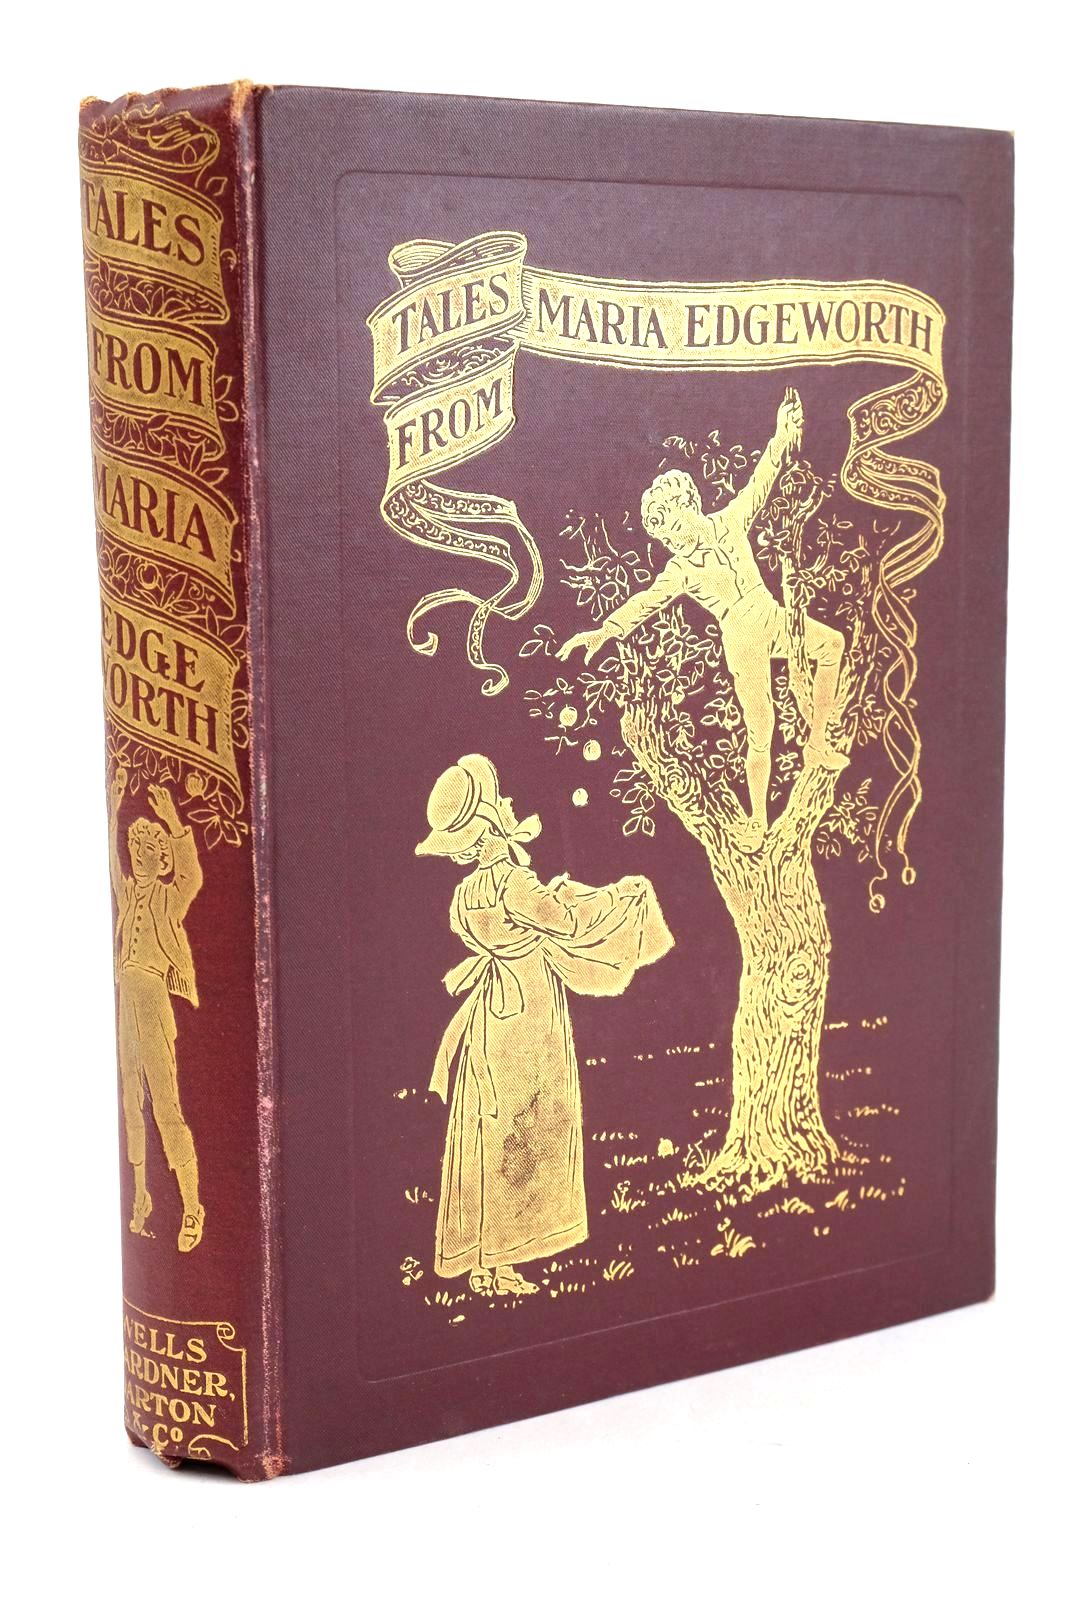 Photo of TALES FROM MARIA EDGEWORTH written by Edgeworth, Maria illustrated by Thomson, Hugh published by Wells Gardner, Darton & Co. Limited (STOCK CODE: 1324582)  for sale by Stella & Rose's Books